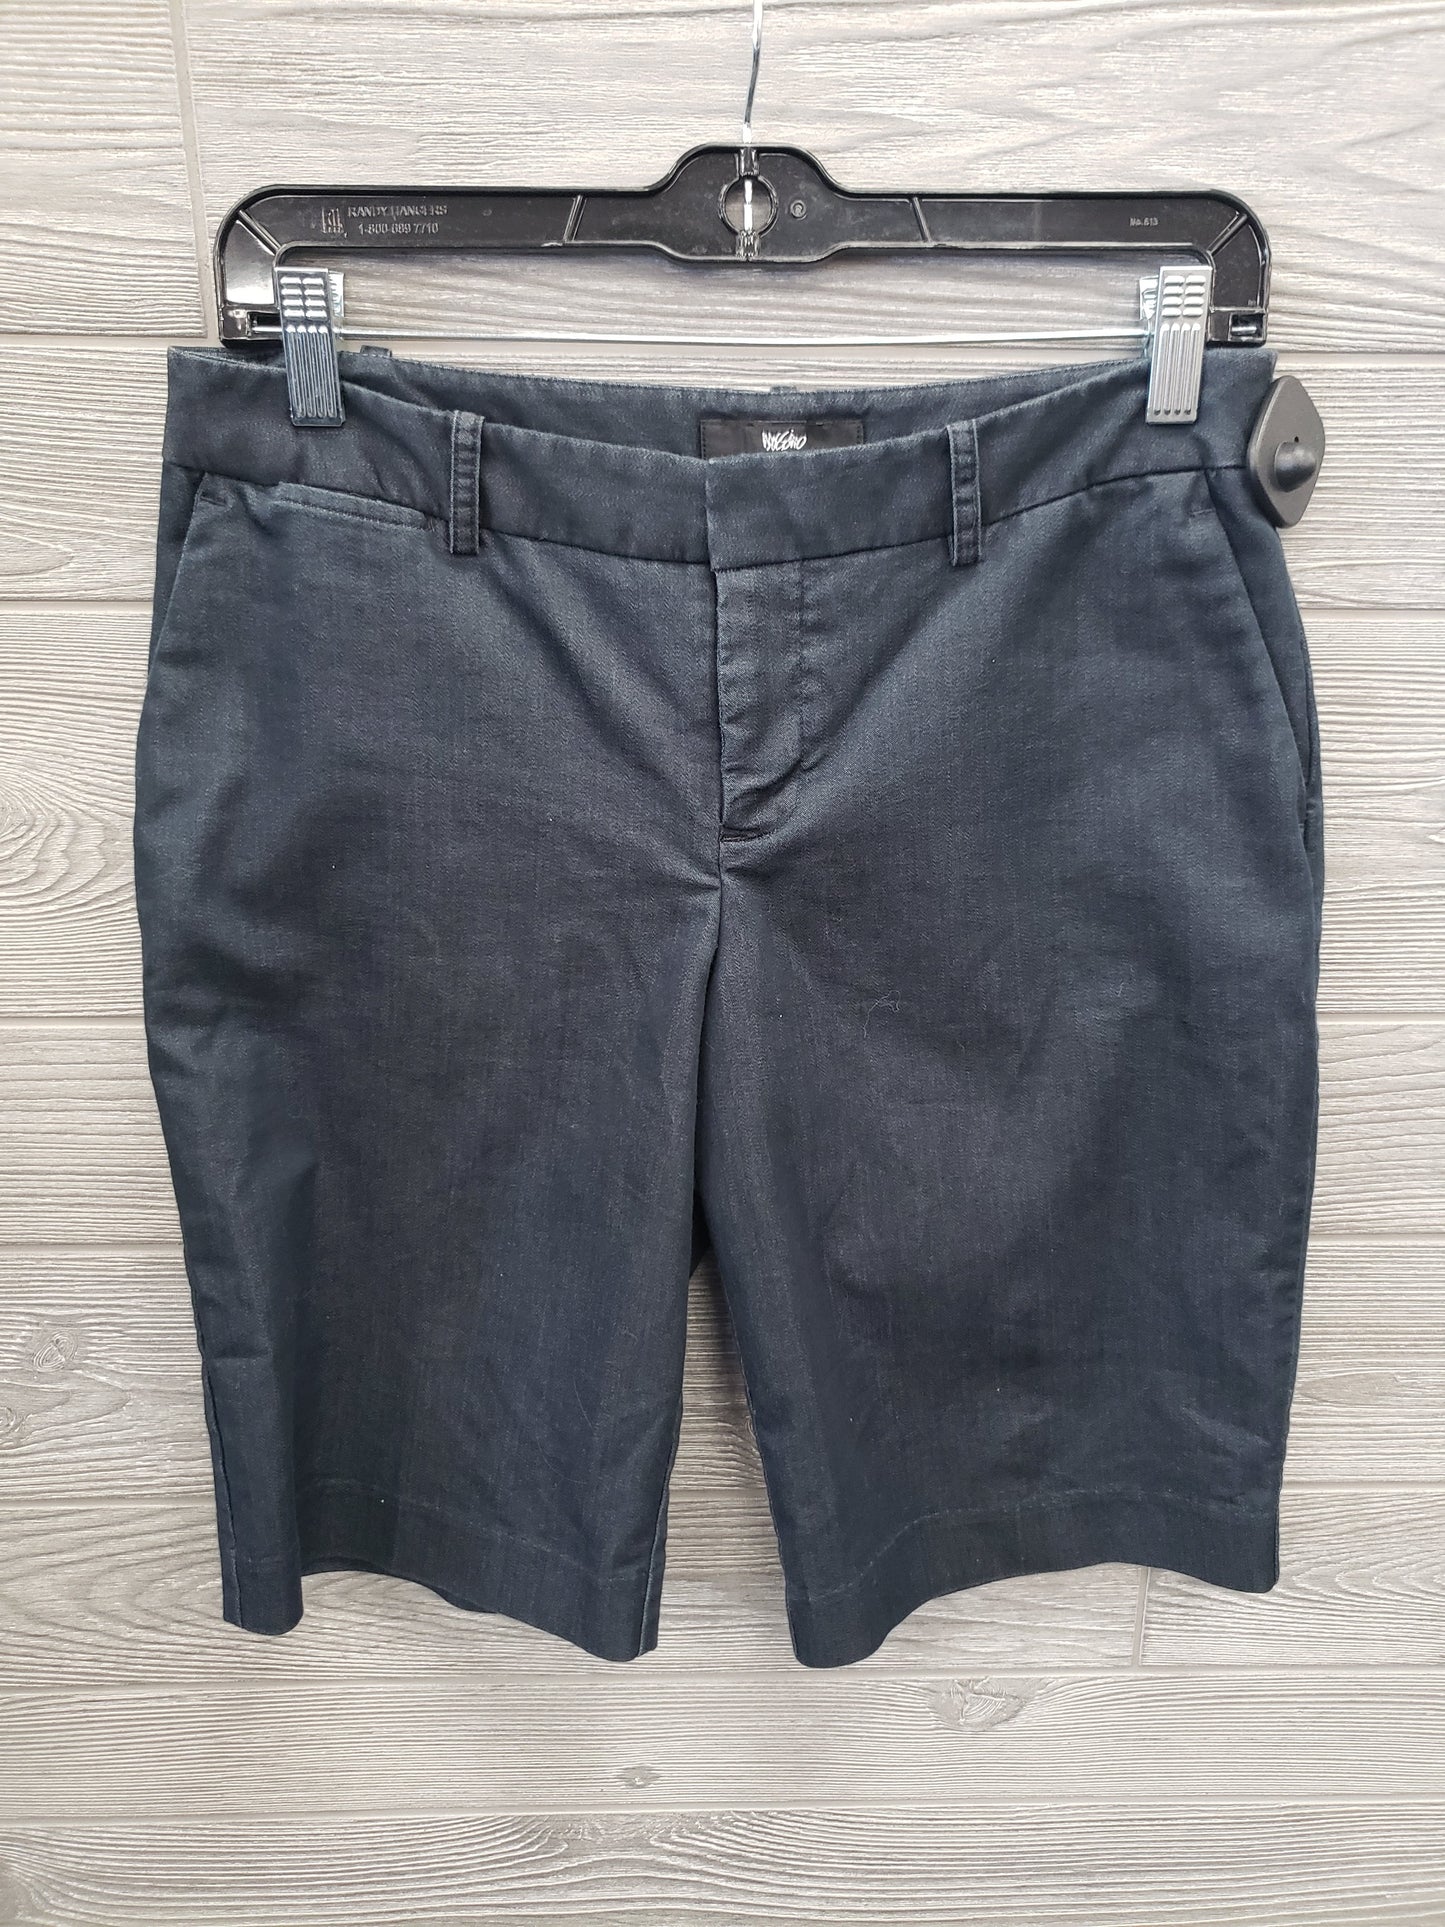 SHORTS BY MOSSIMO SIZE 4